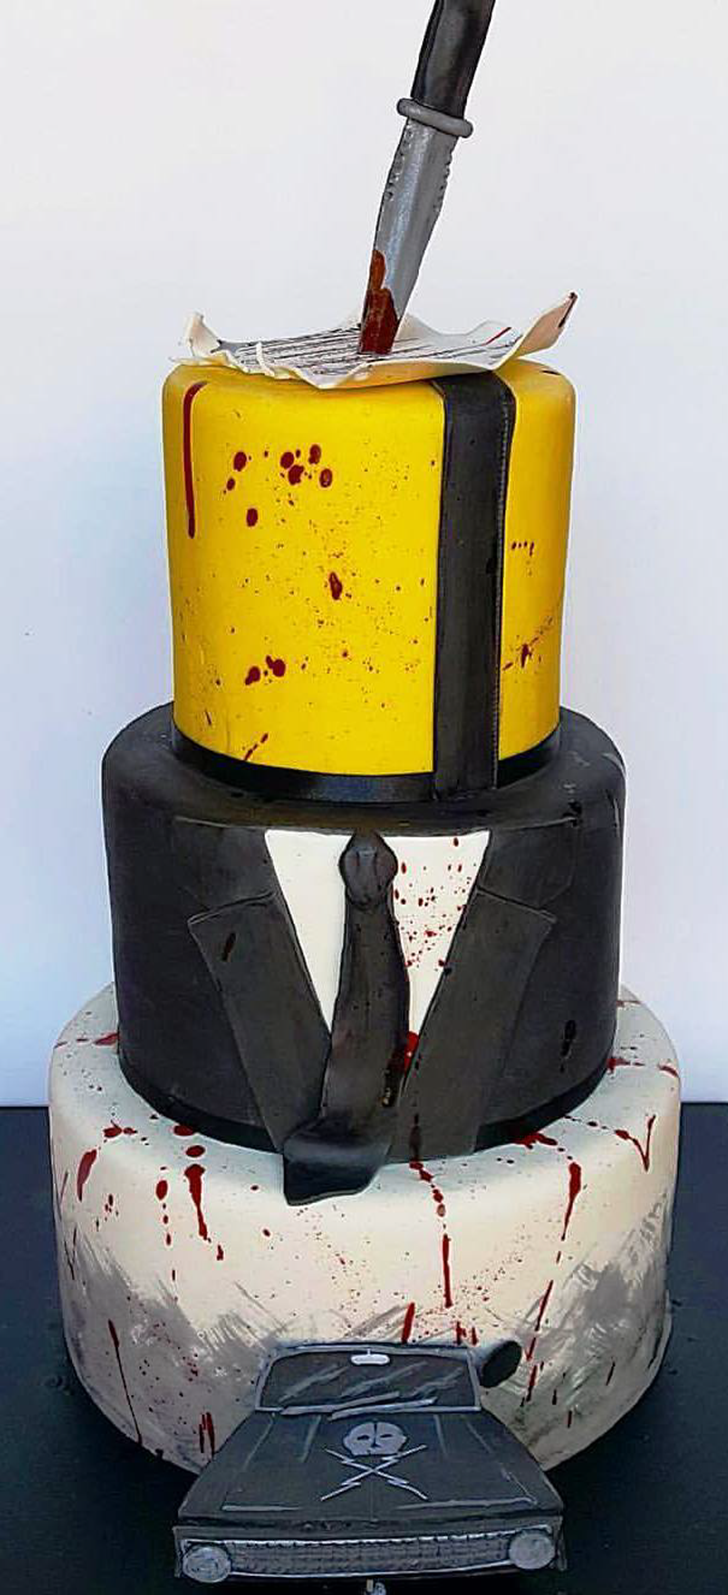 Magnetic Pulp Fiction Cake